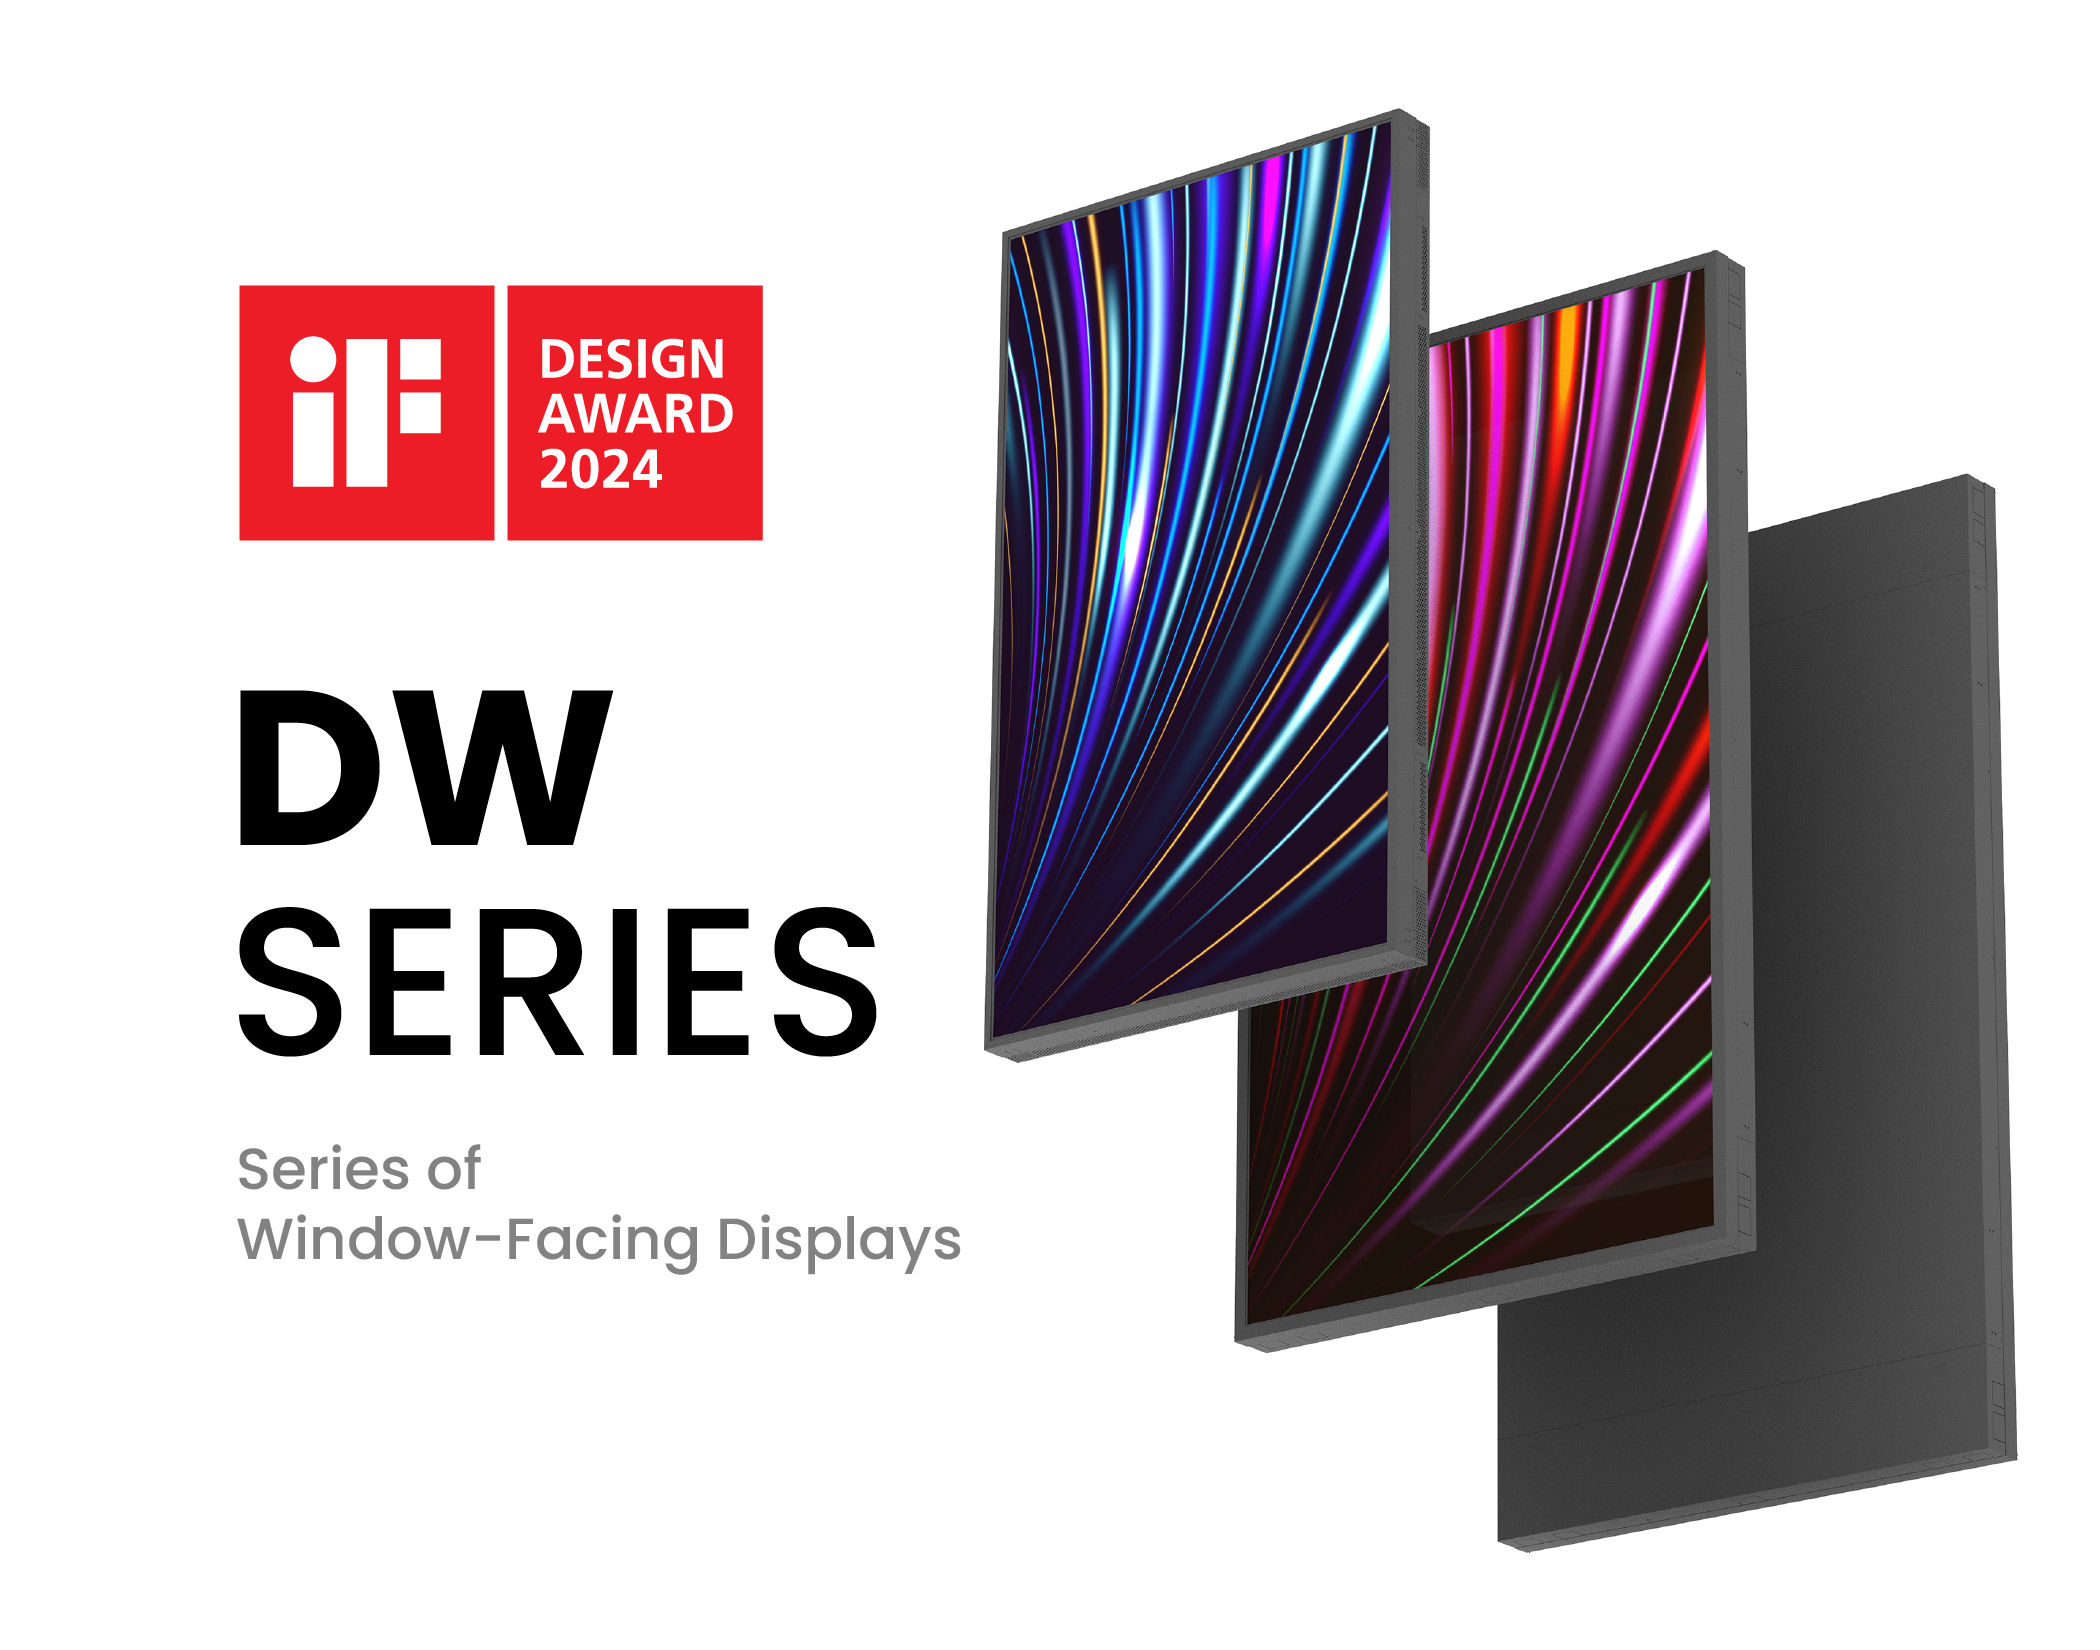 DW Series Honored with iF DESIGN AWARD